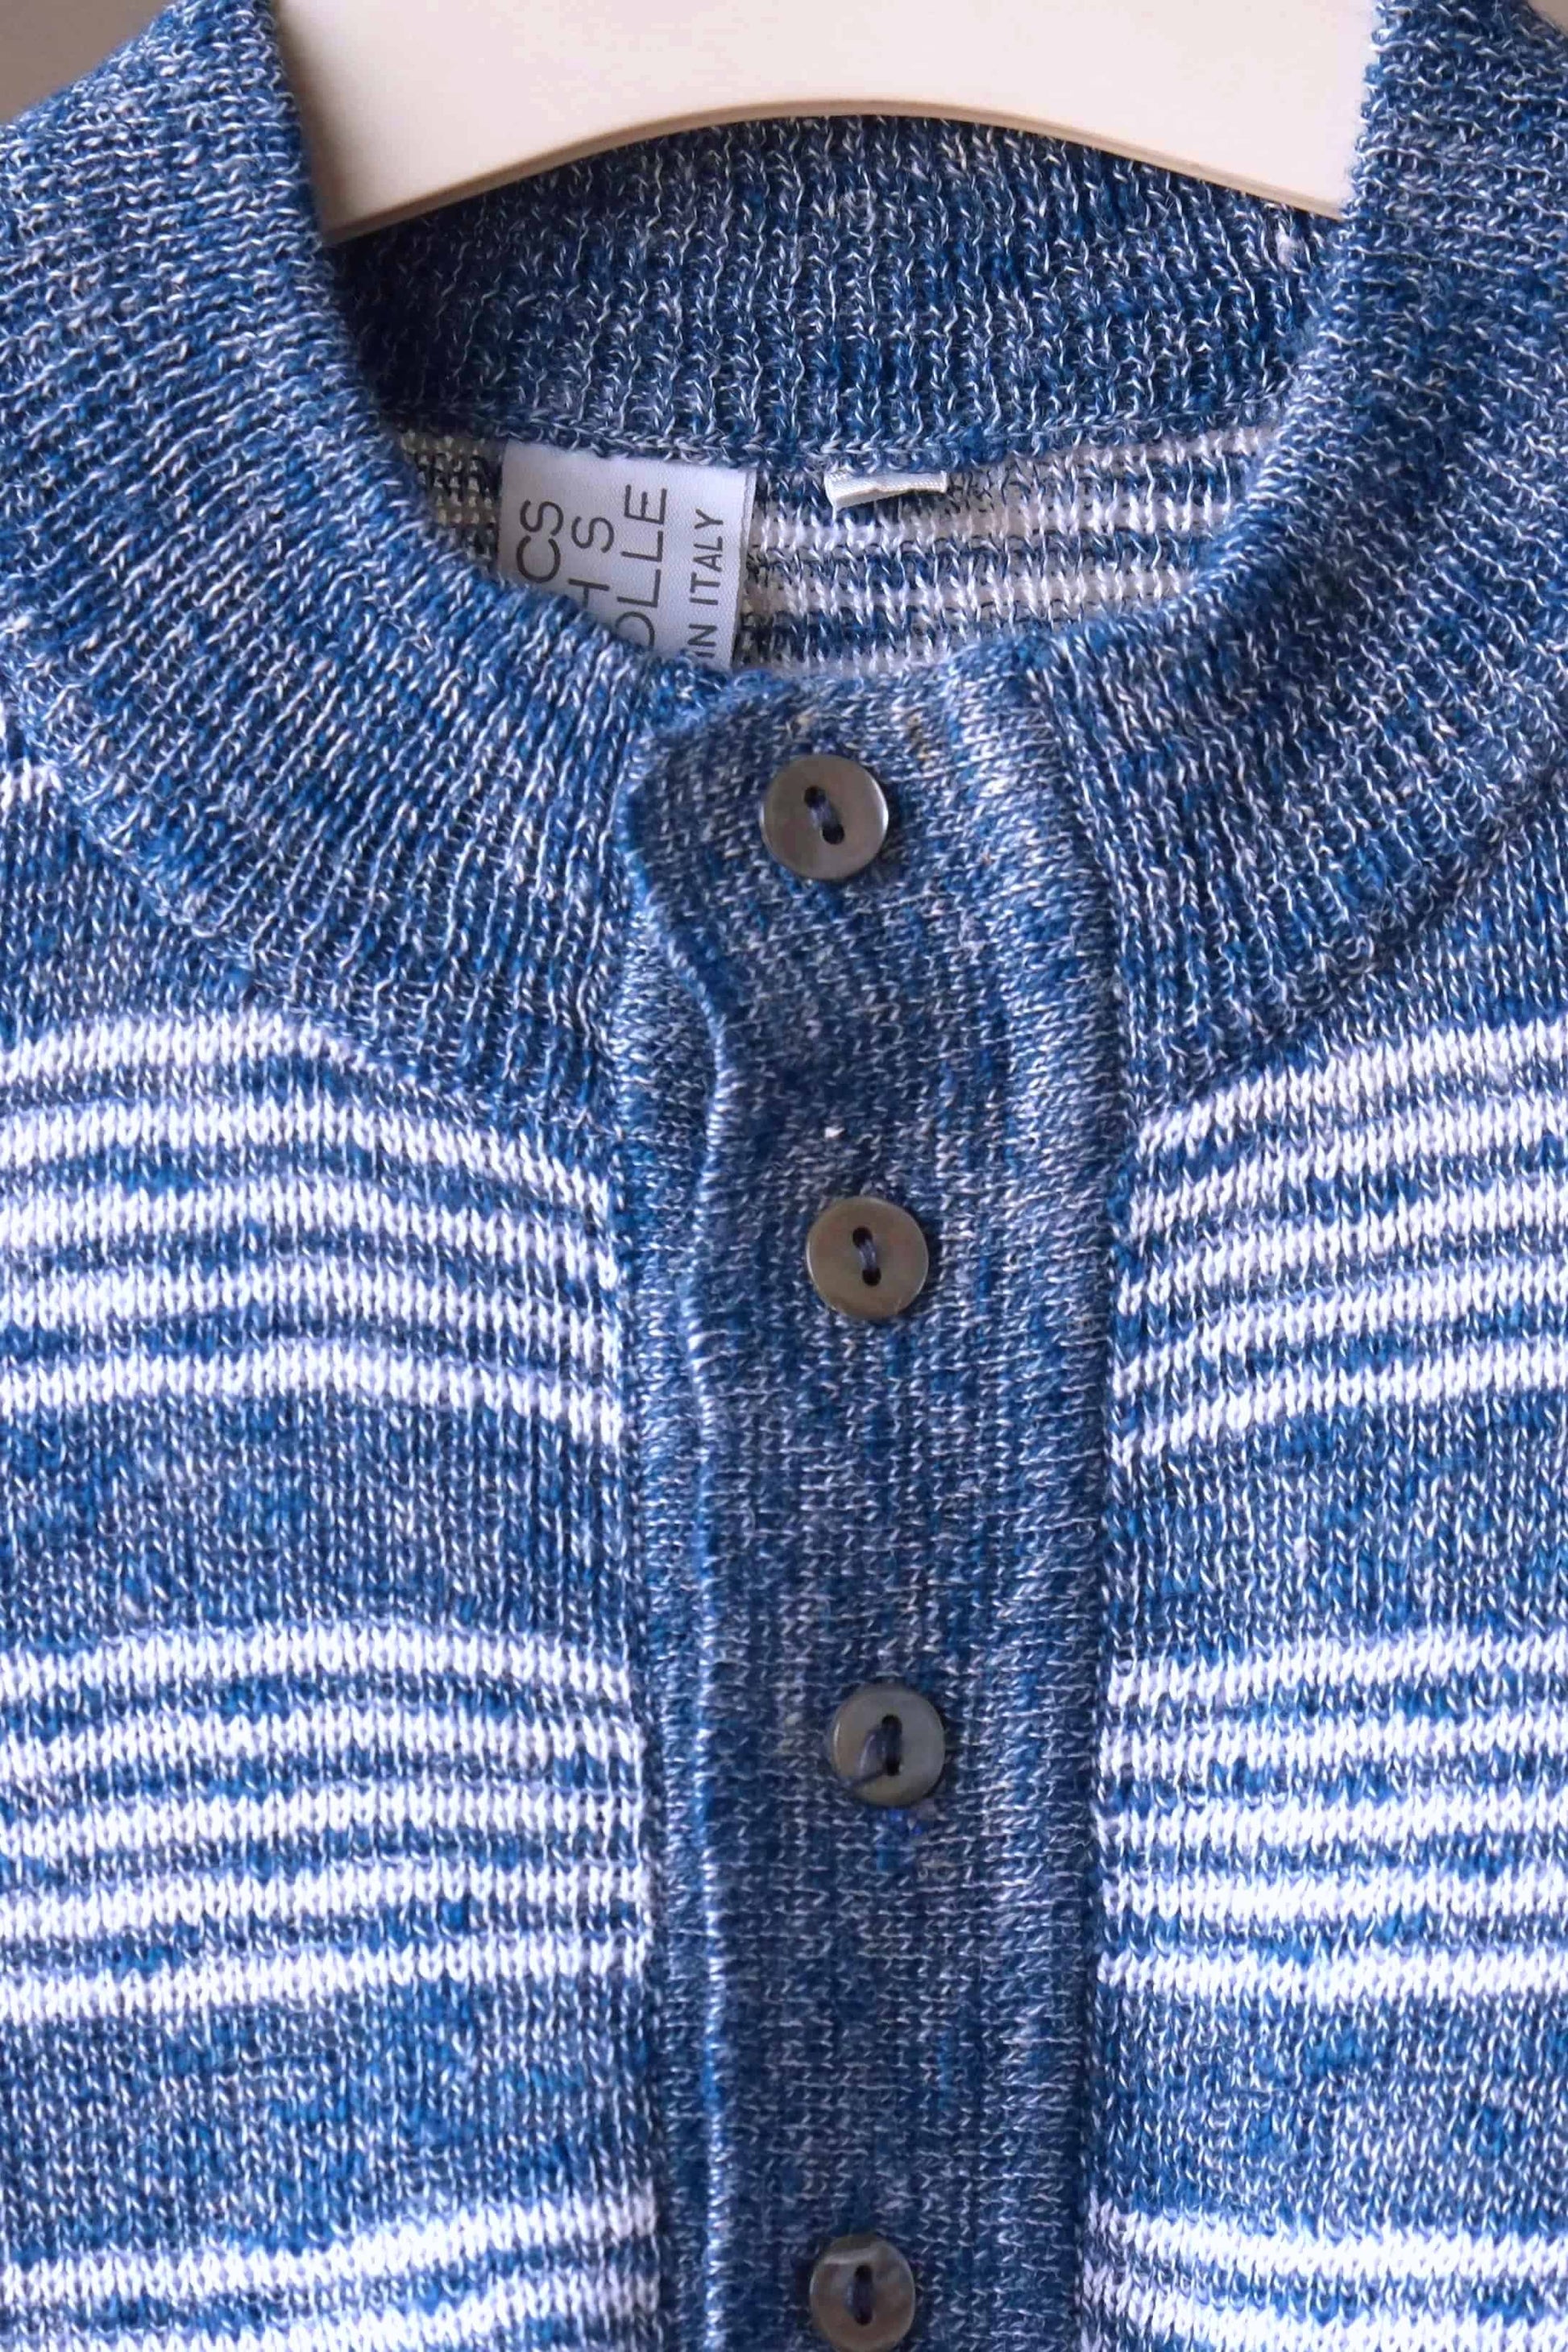 70's Women's Knitted Top blue close up